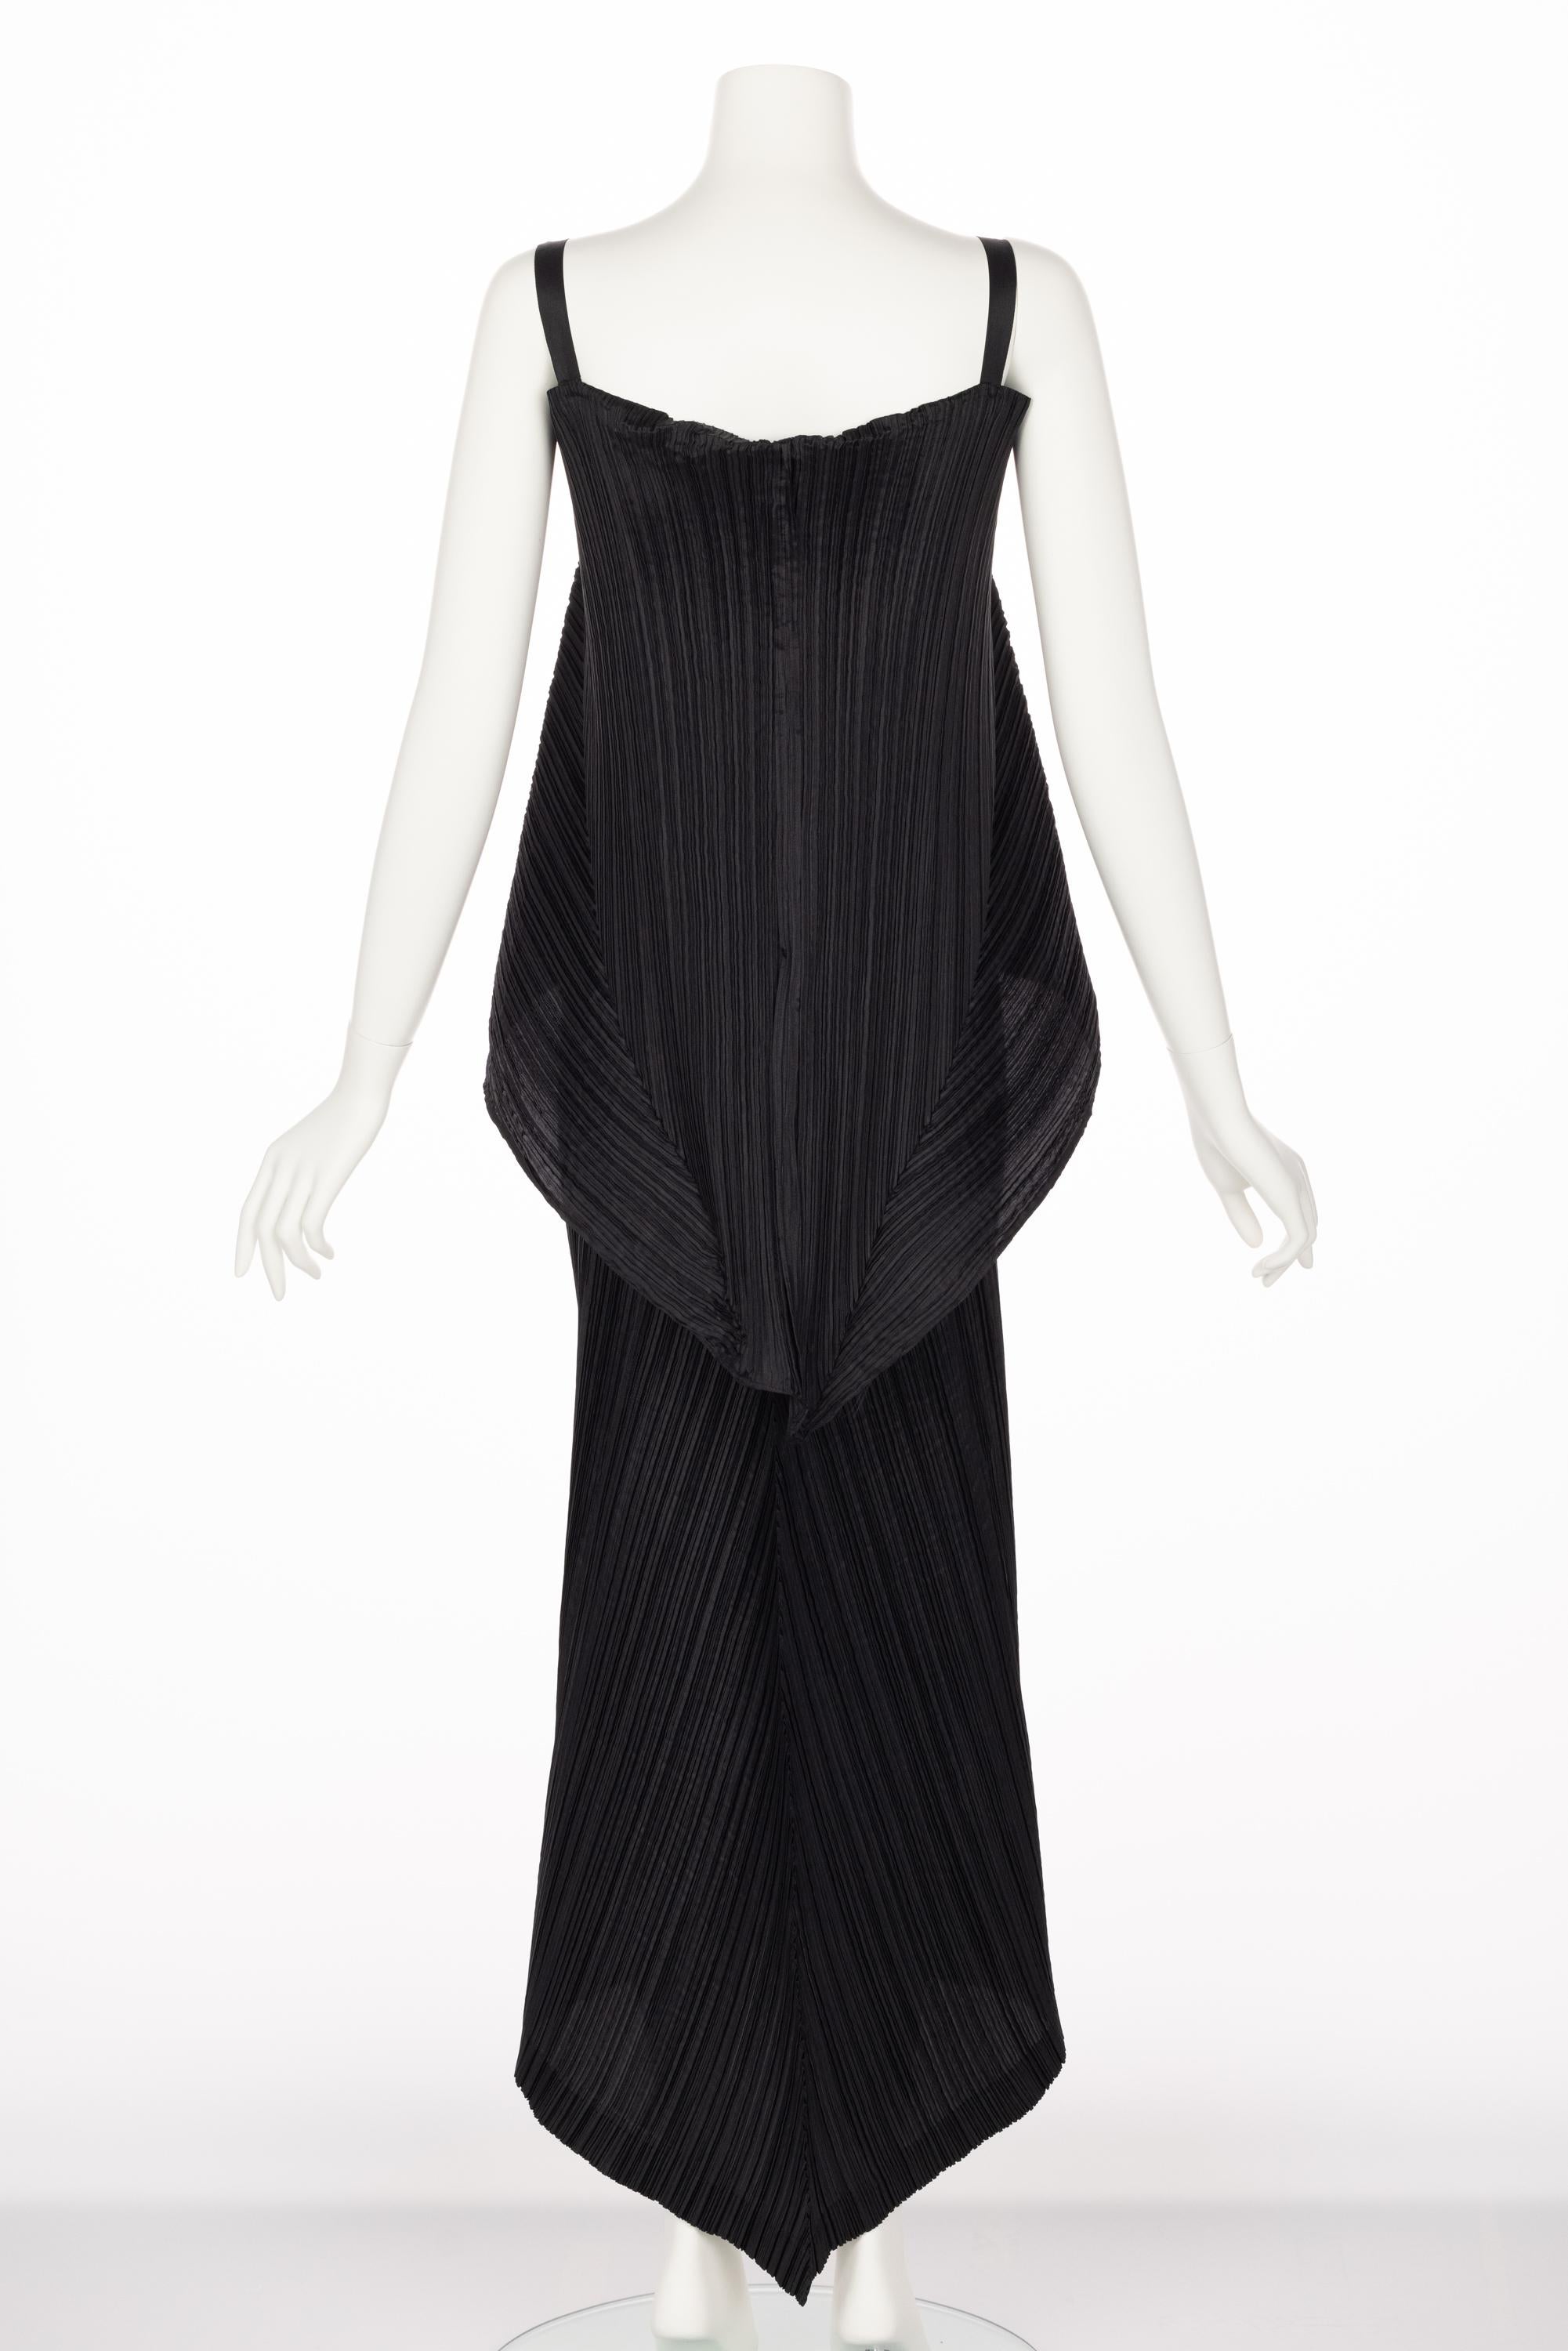 Issey Miyake Black Pleated Sculptural Sleeveless Maxi Dress, 1990s For Sale 3